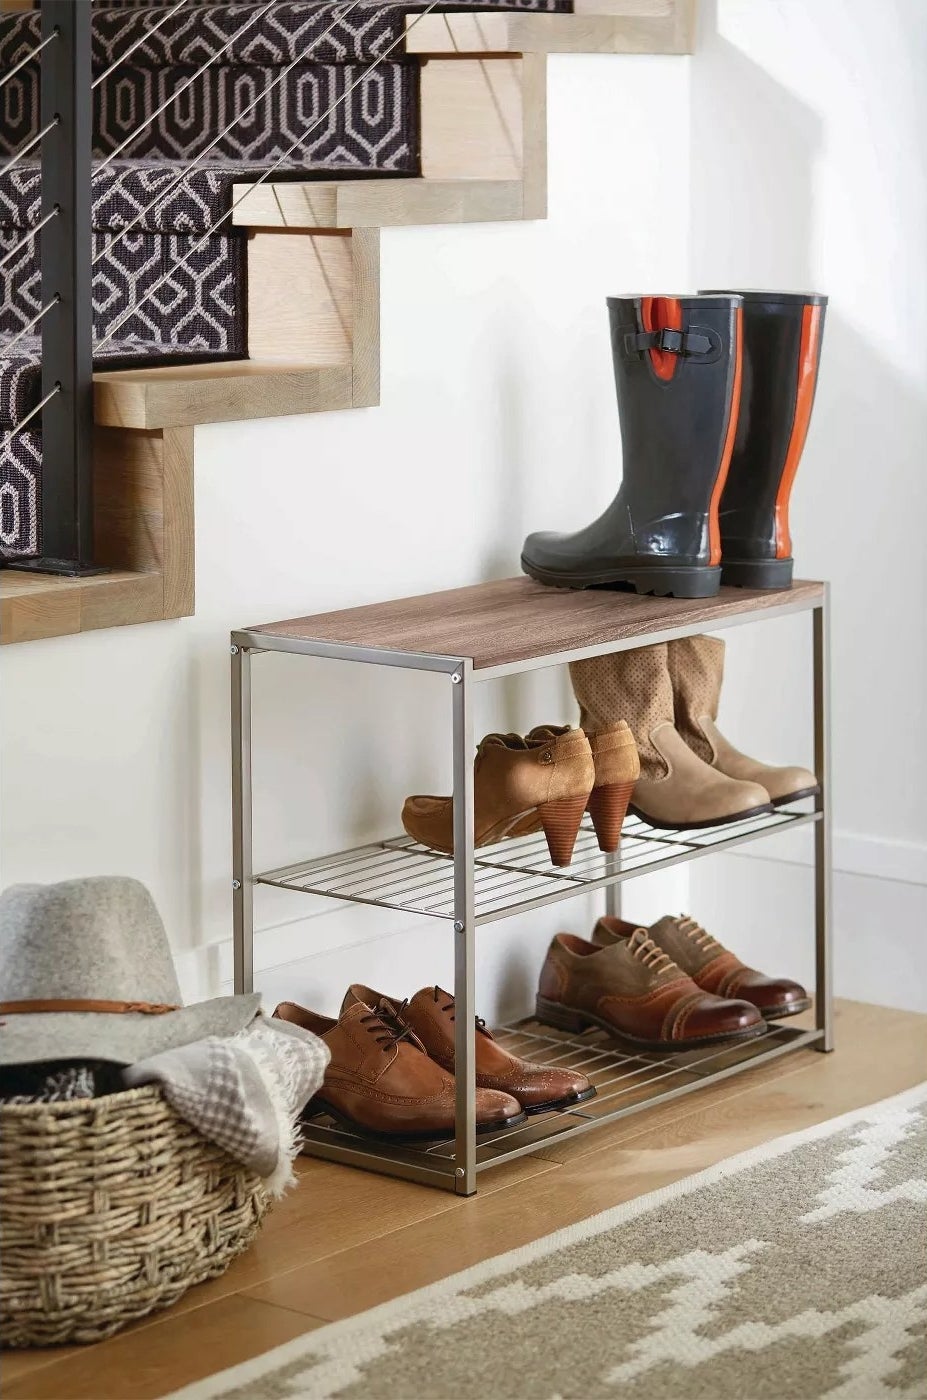 The shoe rack with three tiers and a wooden top in an entryway